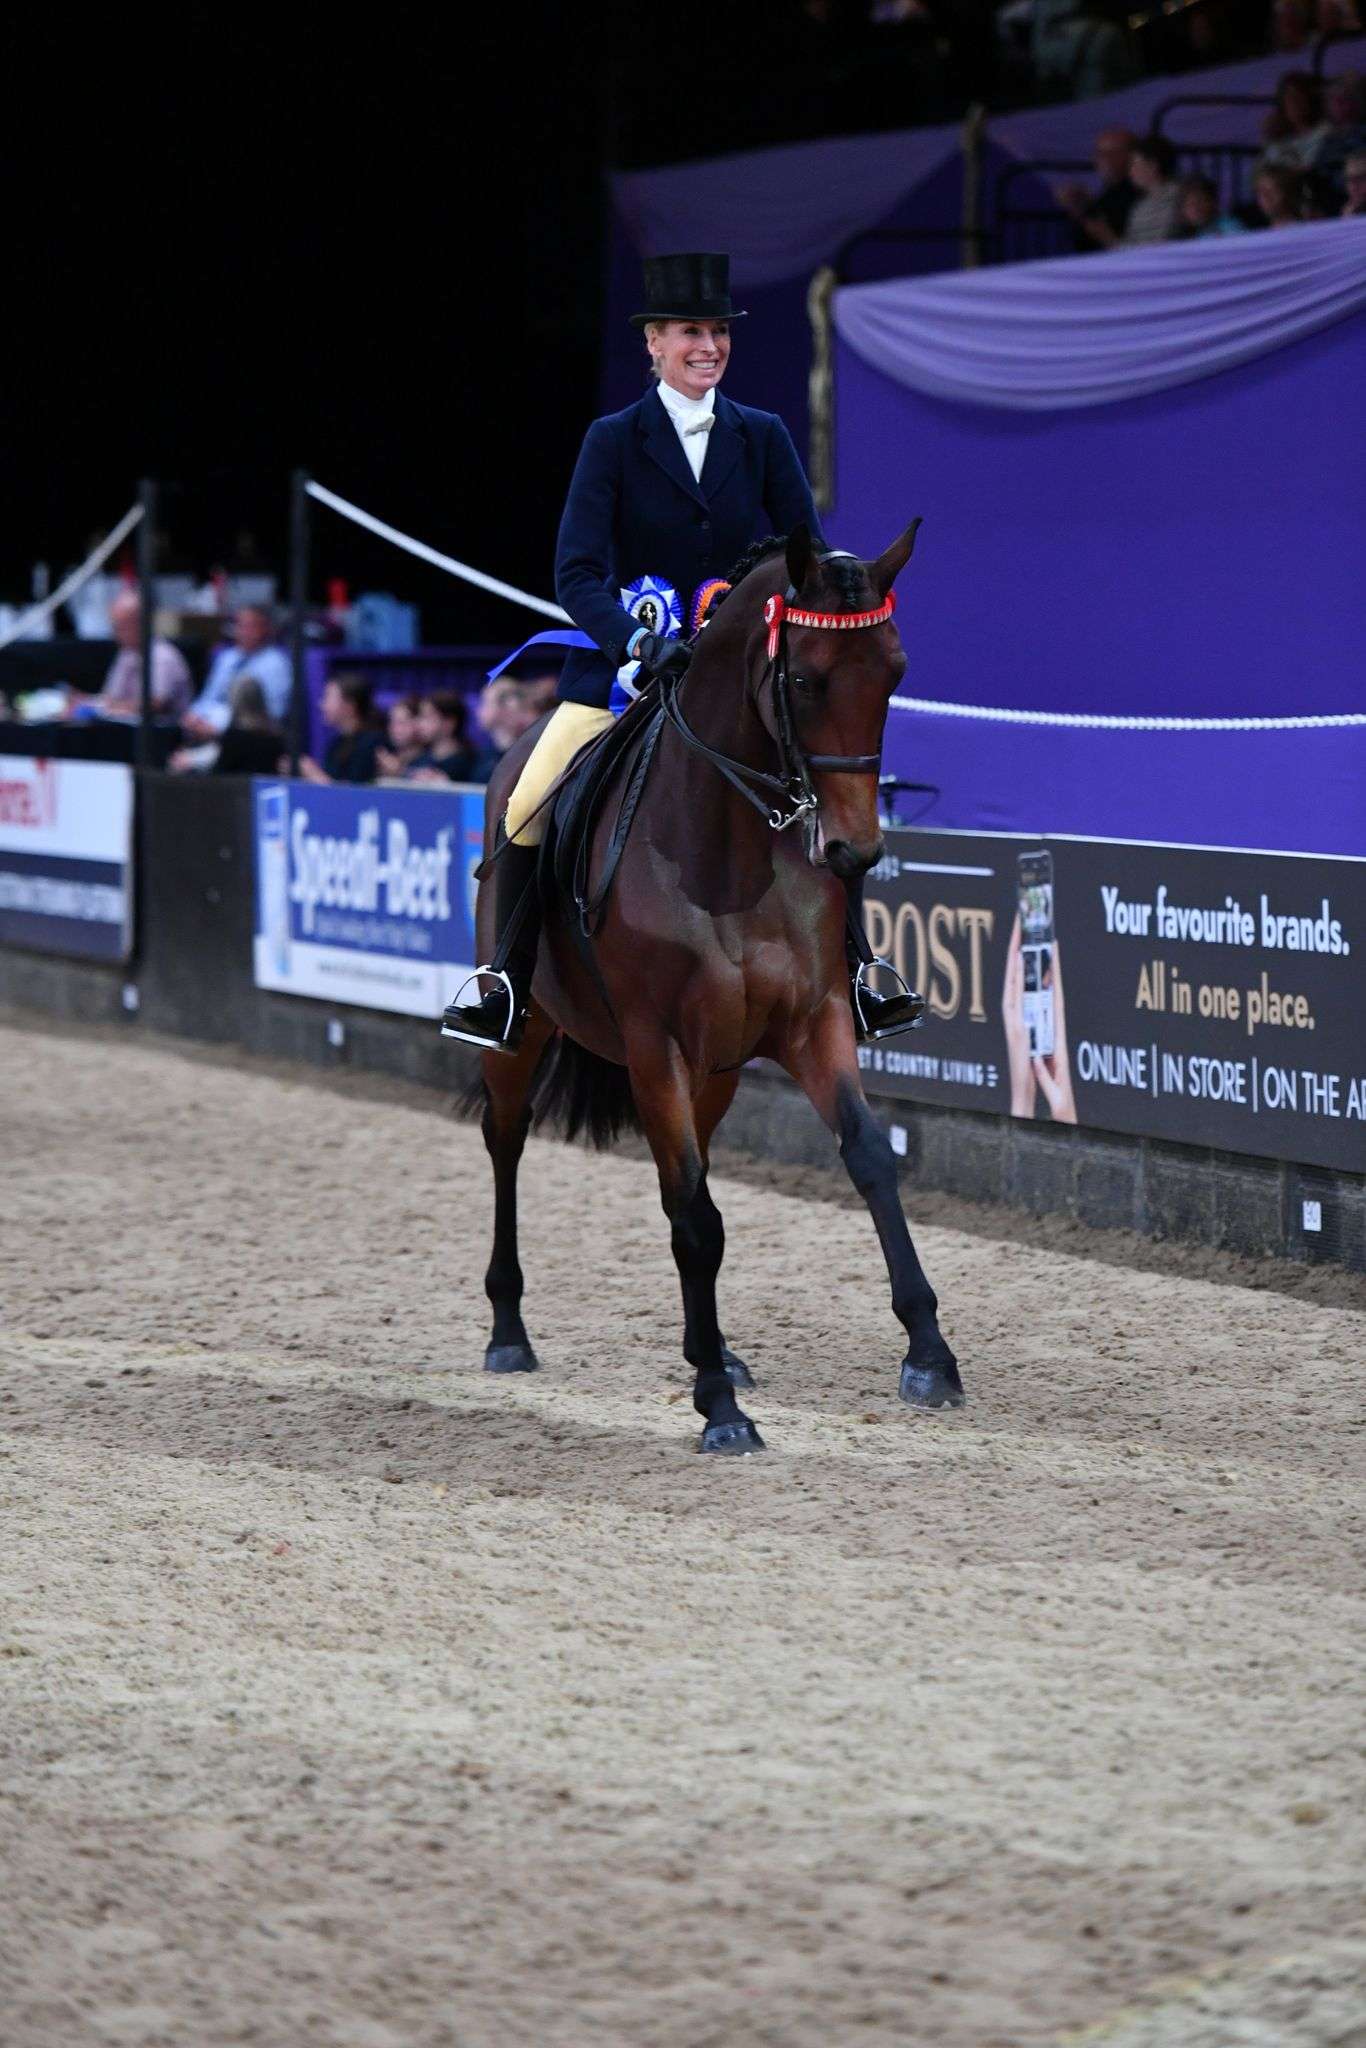 2nd place, Tracy Bailey and her own horse, Debt of Honour. Image credit 1st Class Images